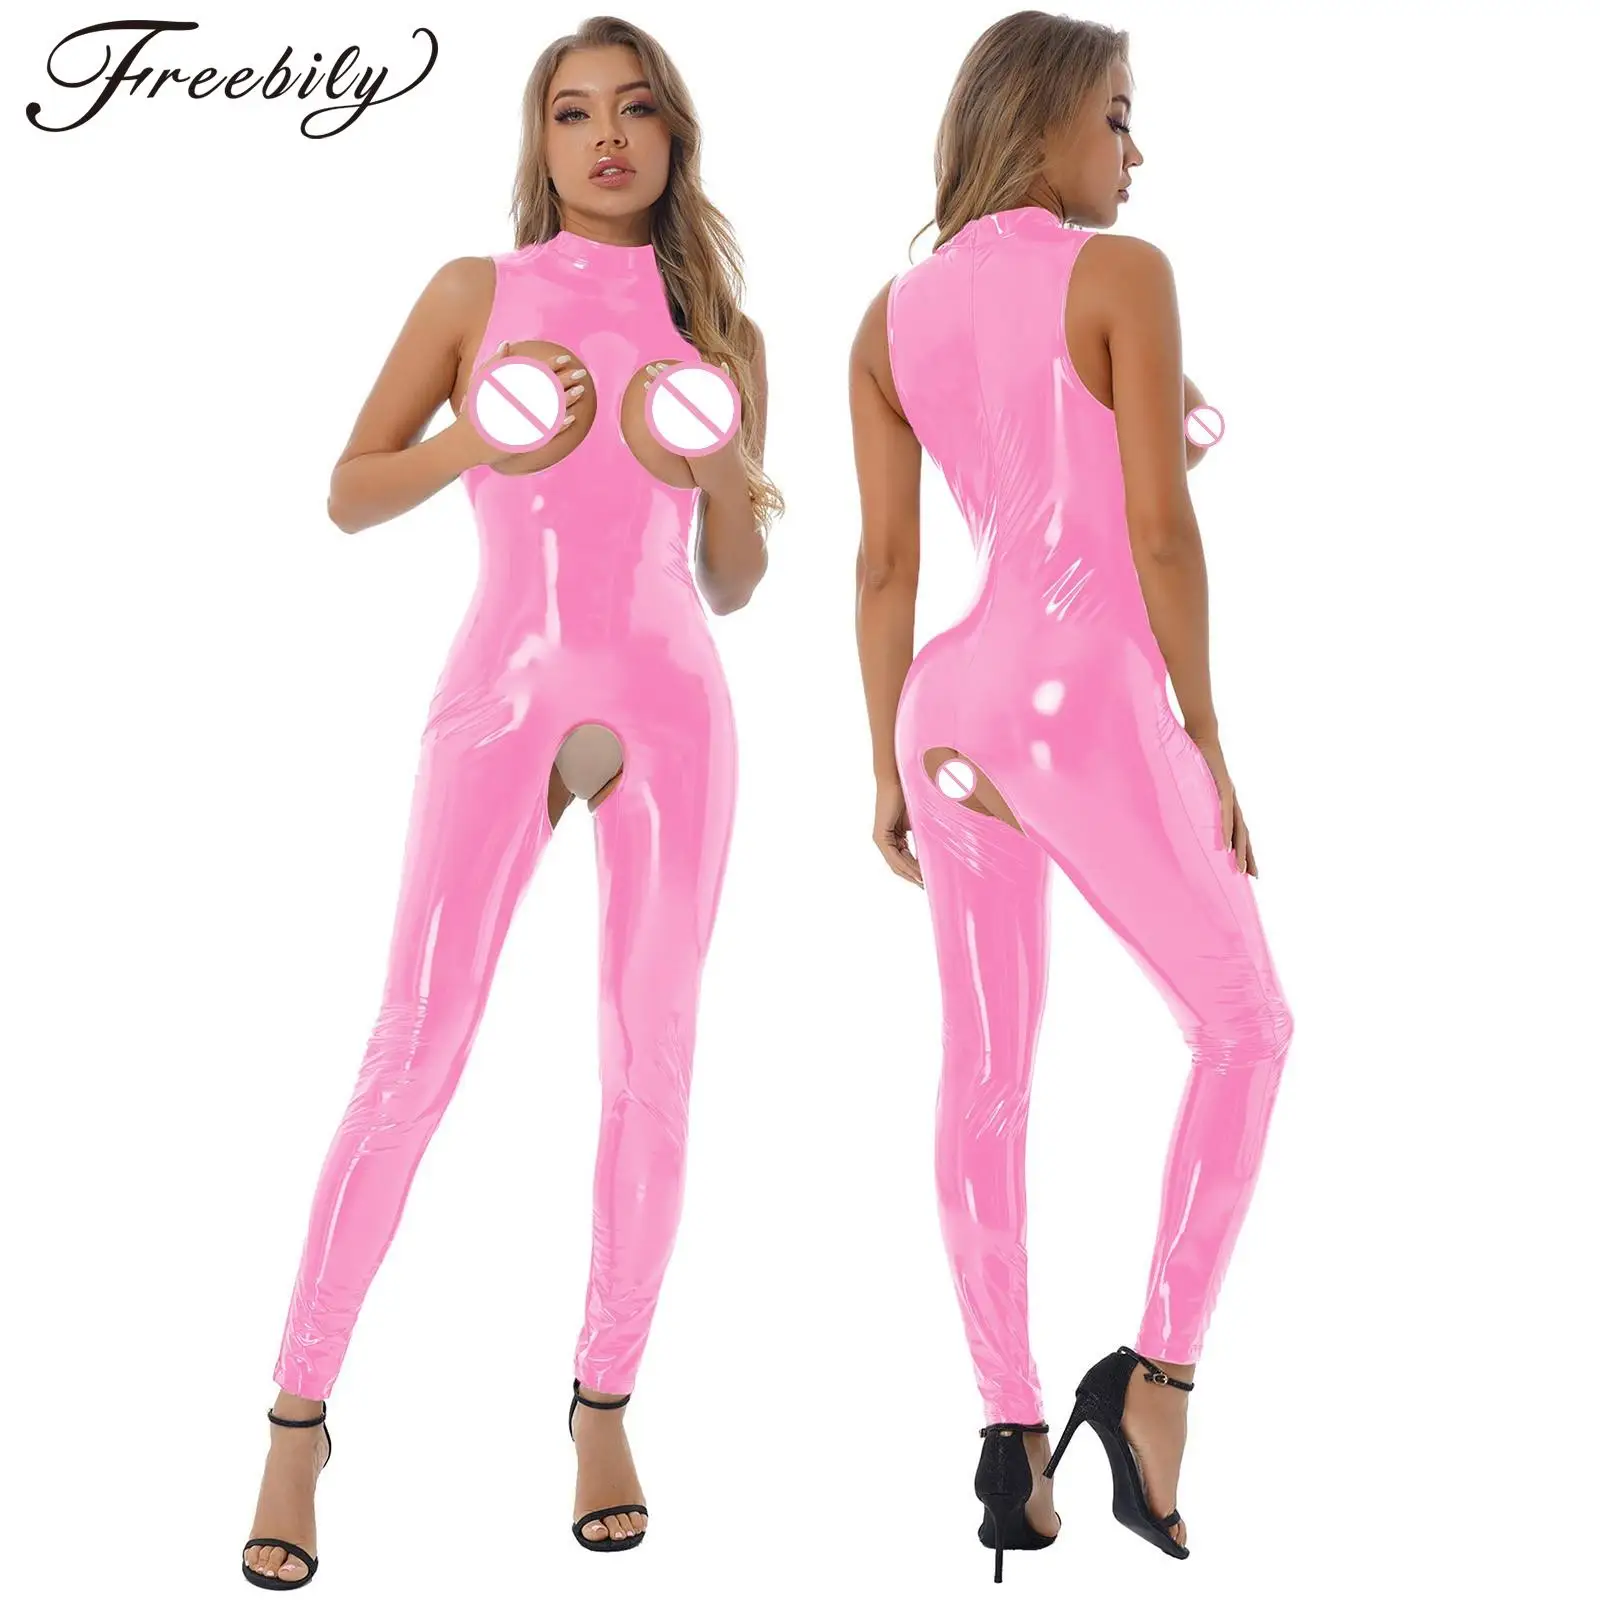 

Women Sexy Crotchless Exposed Nipple Bodysuit Wet Look Patent Leather Open Cups Jumpsuit Rave Pole Dancing Clubwear Nightwear